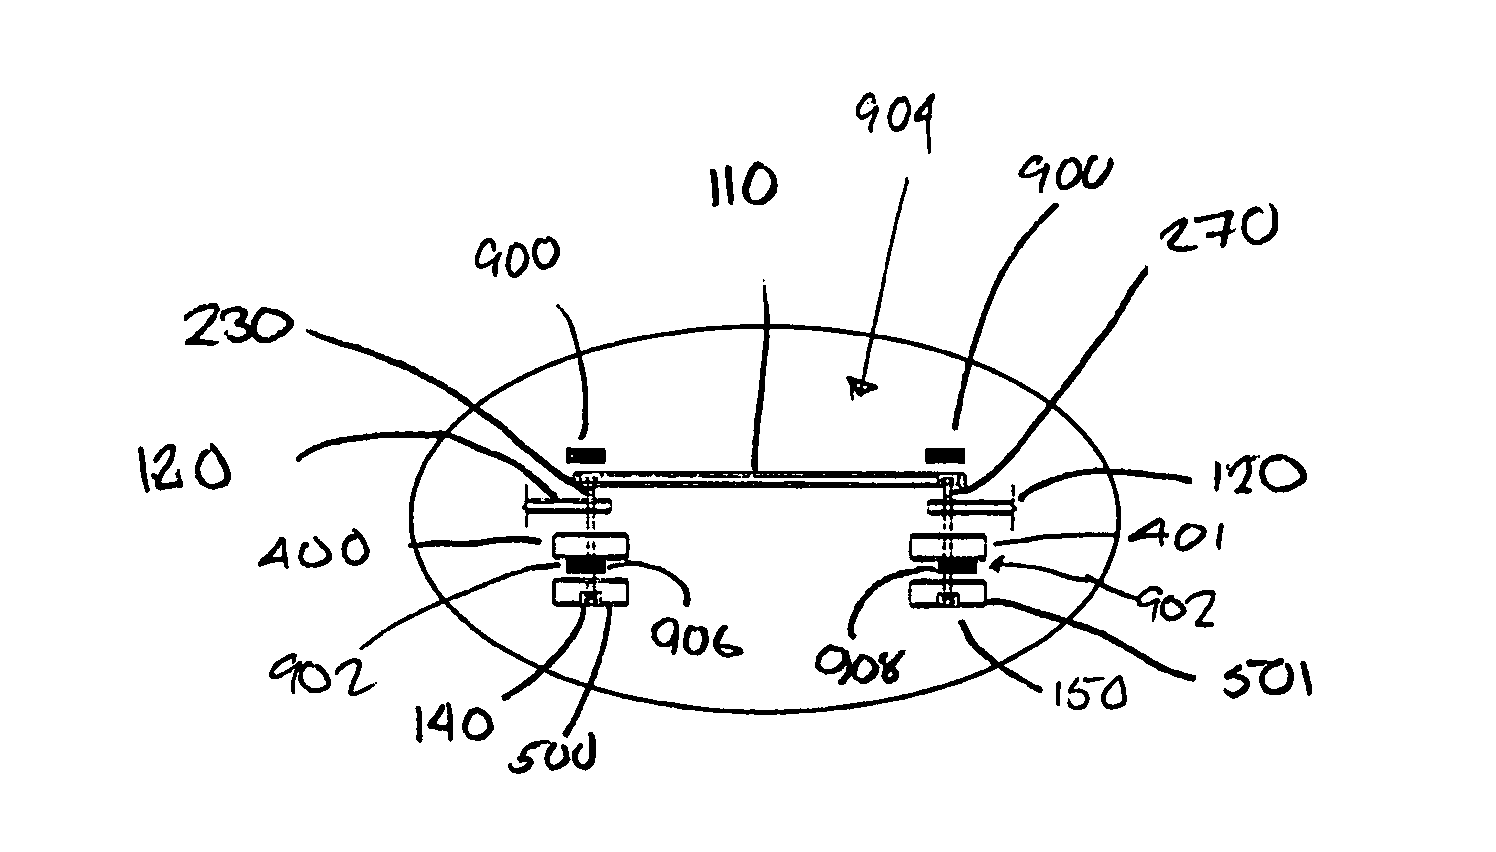 Hockey Stick-Handling Device with Sensor and Effects